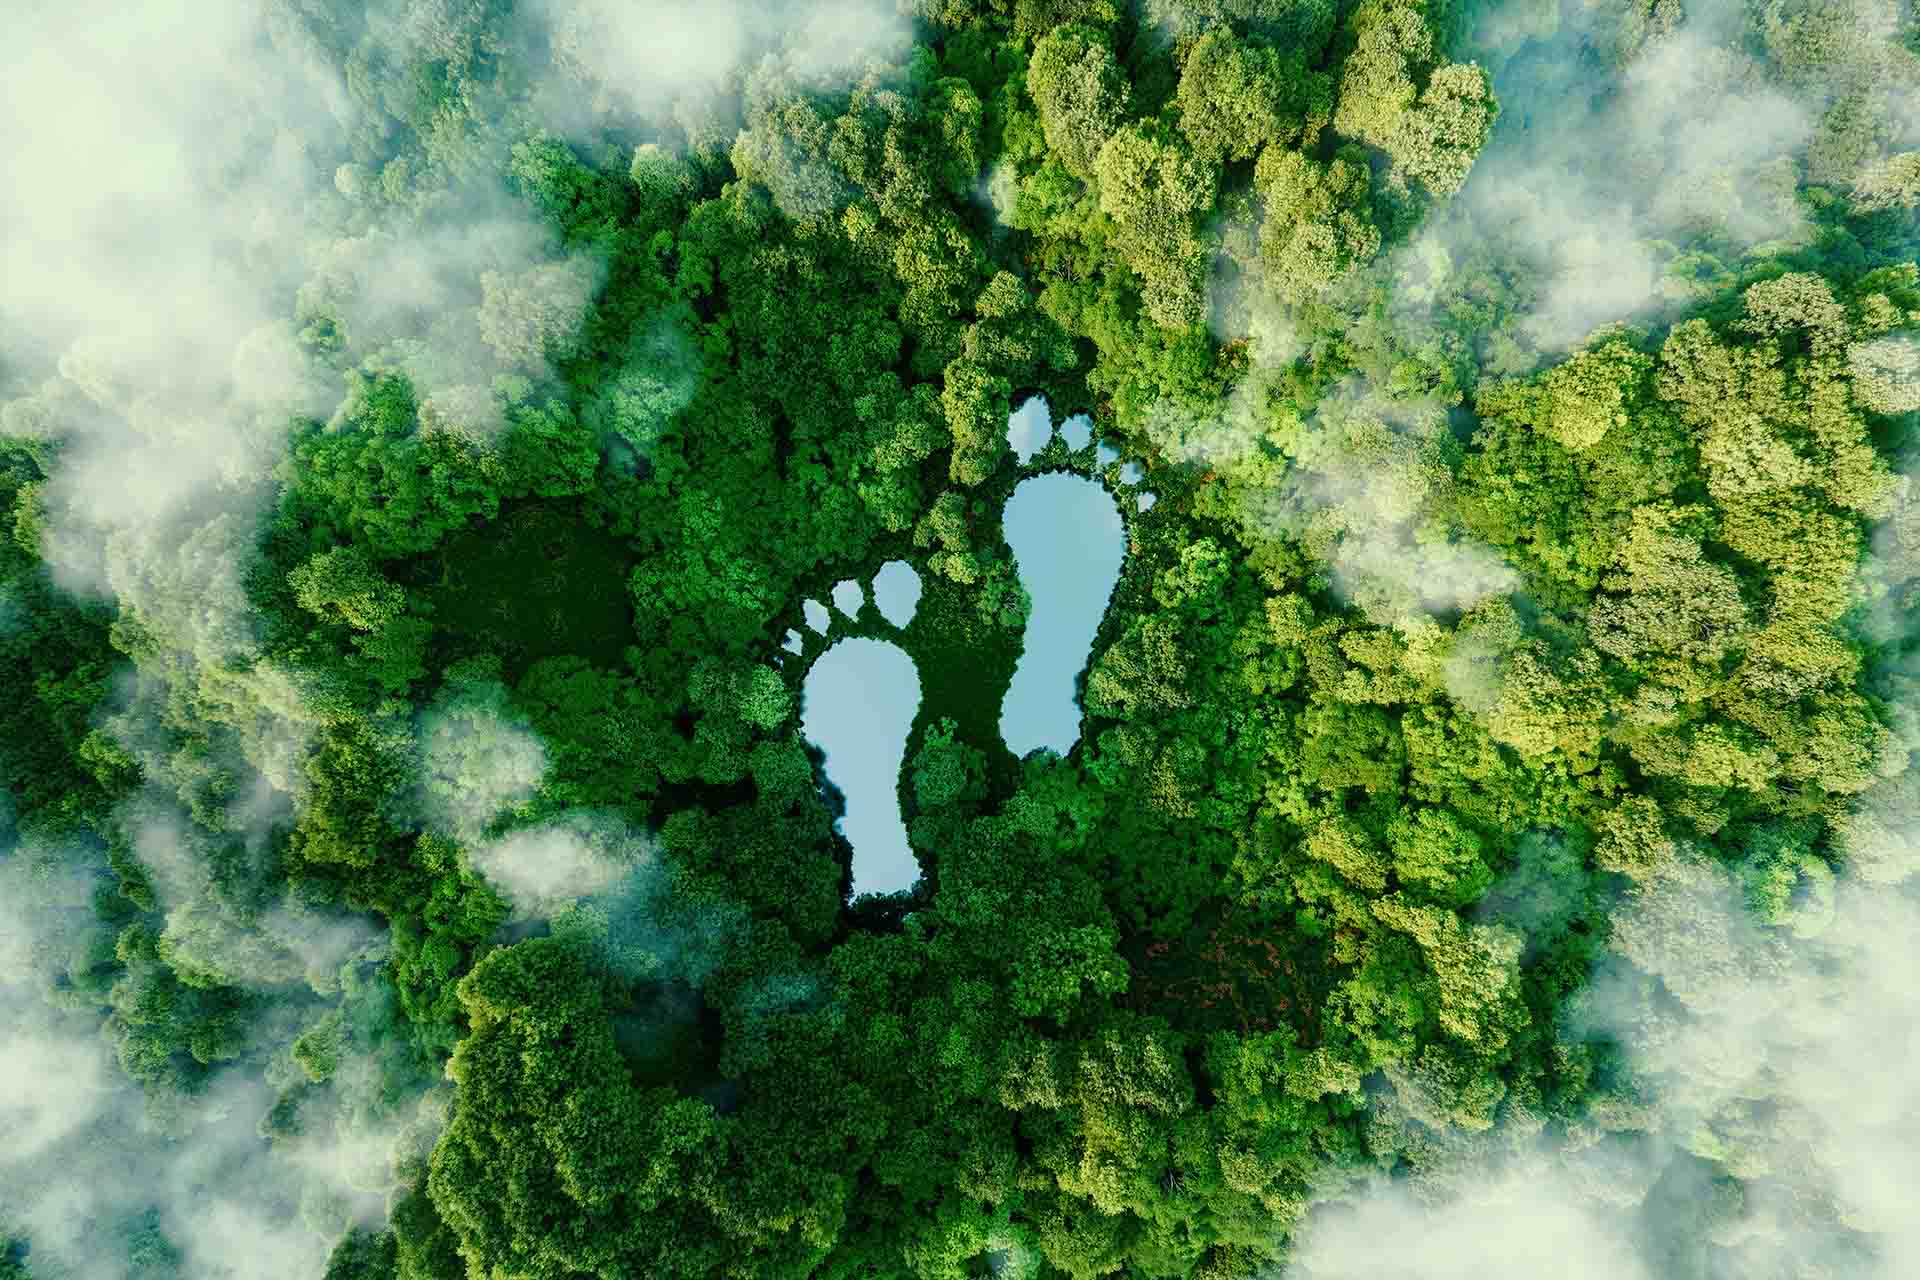 Footprints in a forest landscape